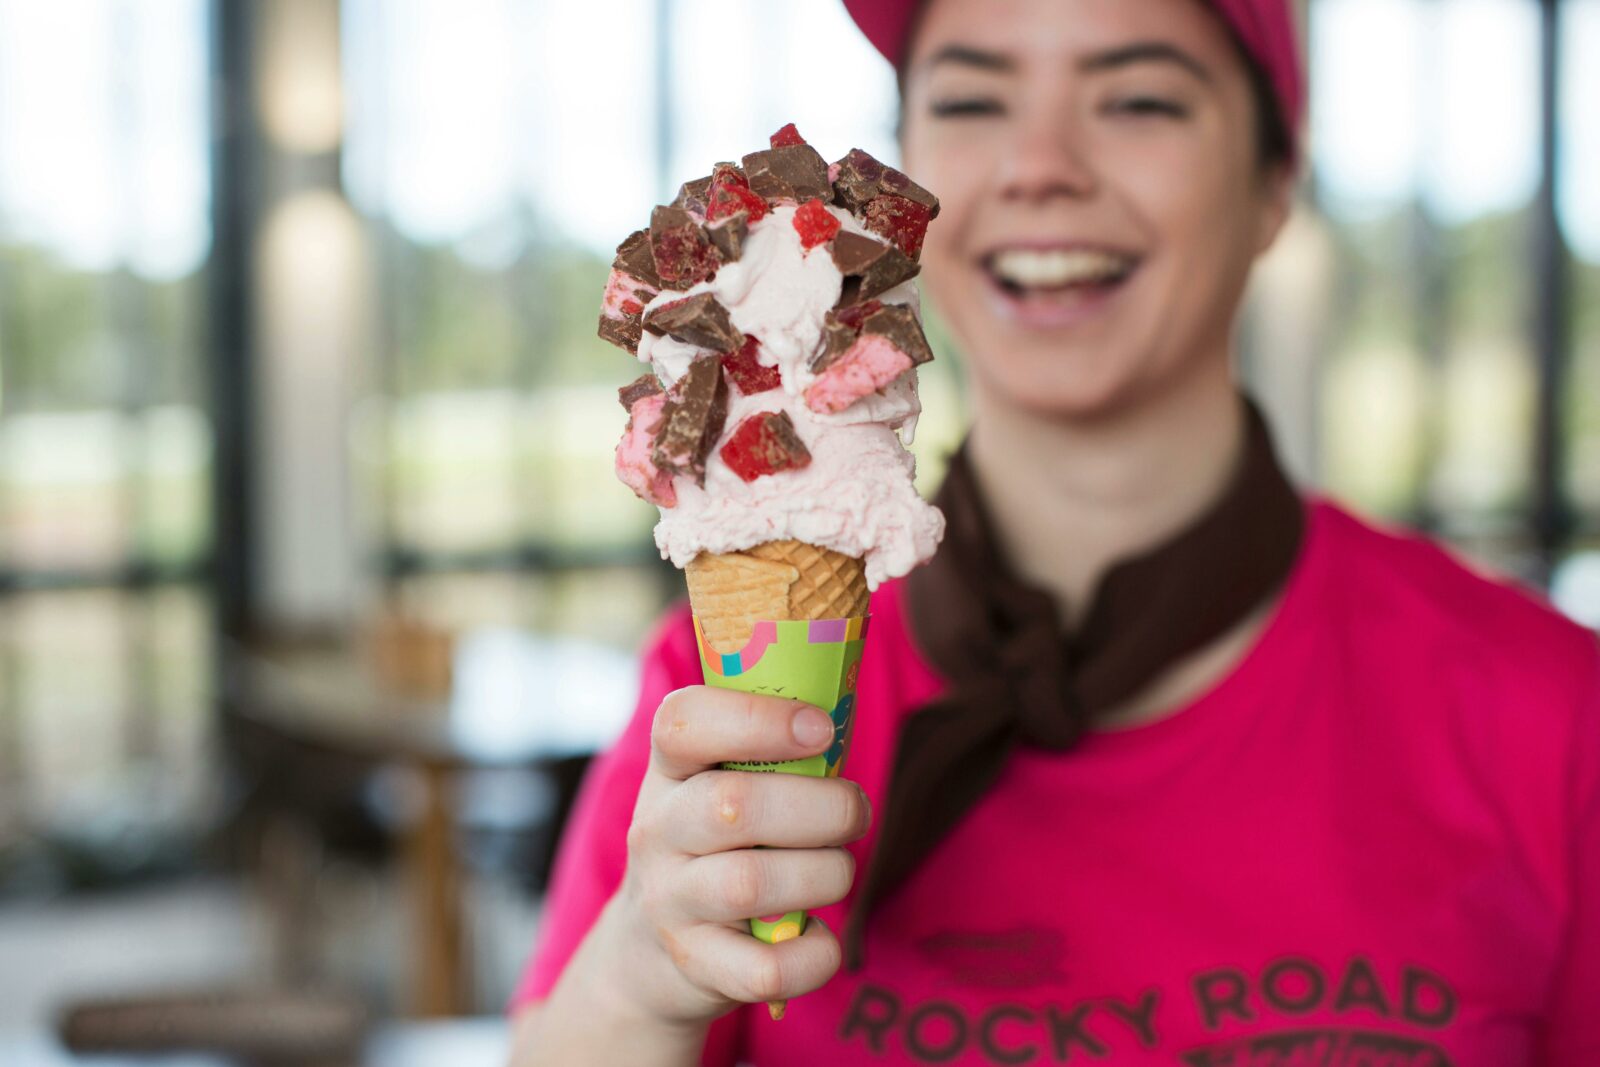 Rocky Road Festival in May at the Chocolaterie is a must